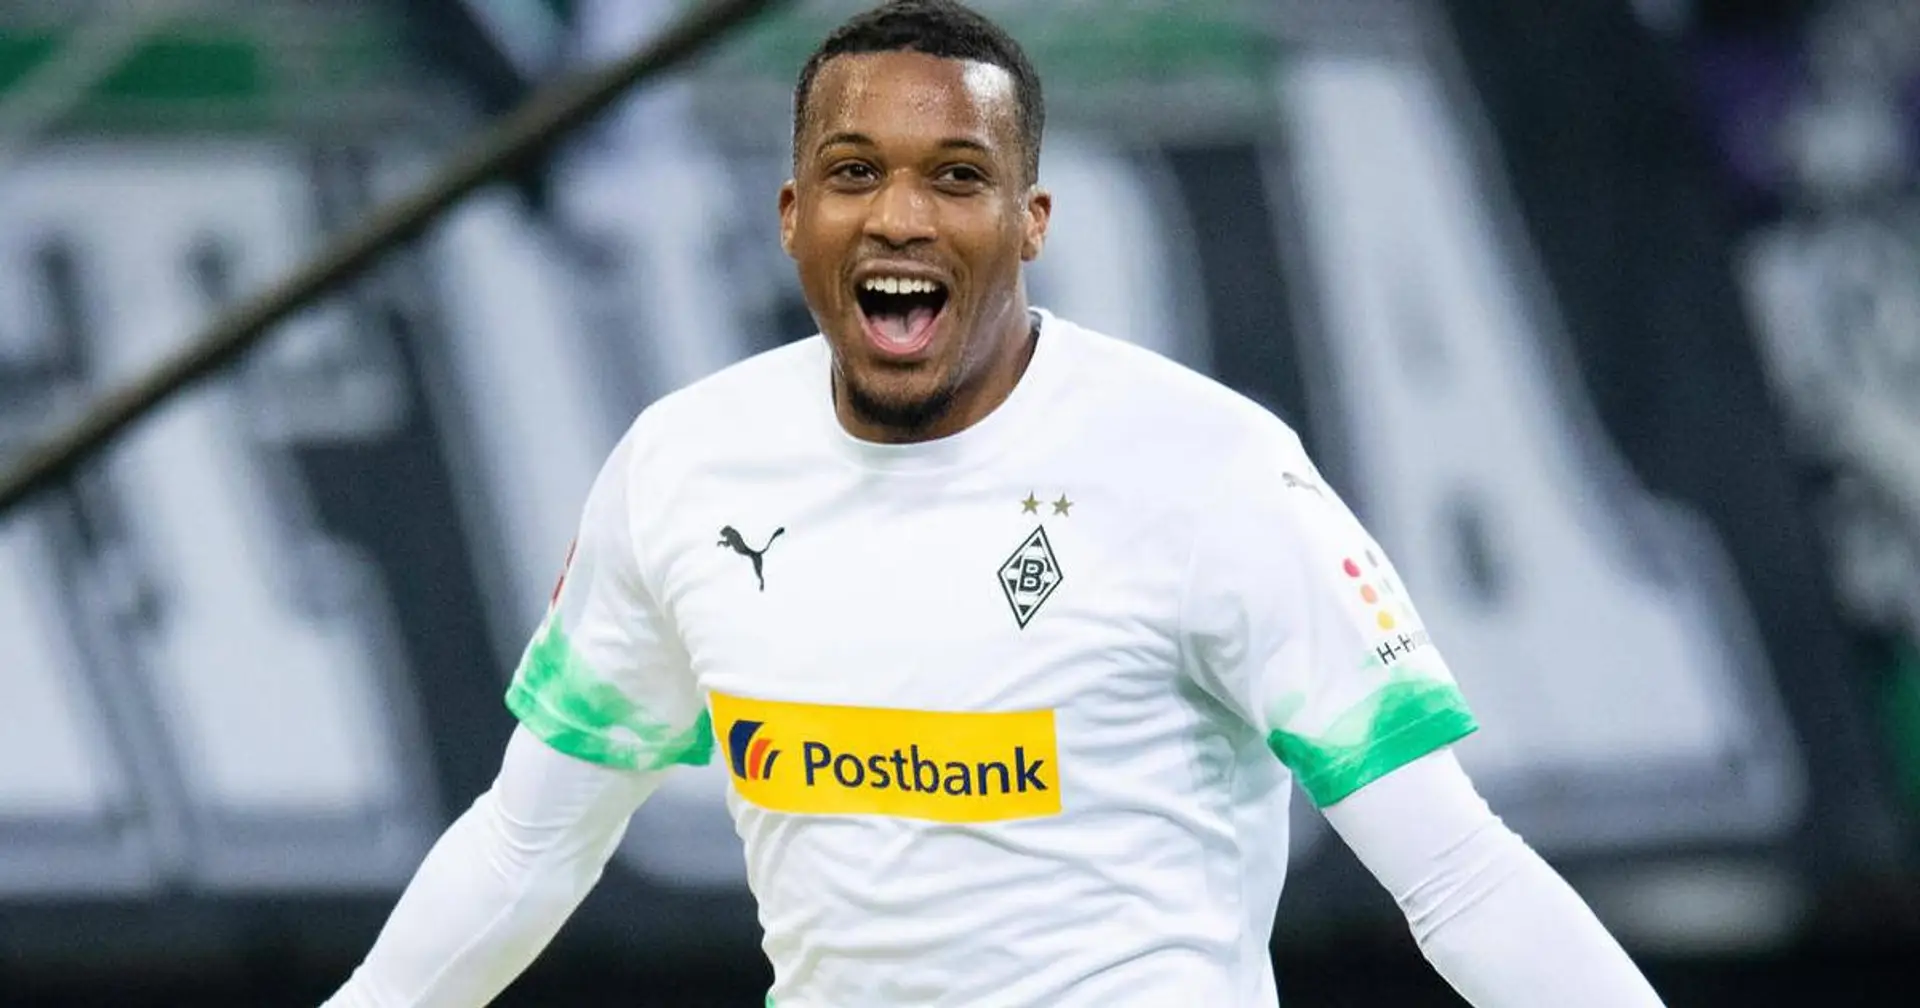 Barca reportedly saw their bid for Gladbach's striker Plea rejected in winter